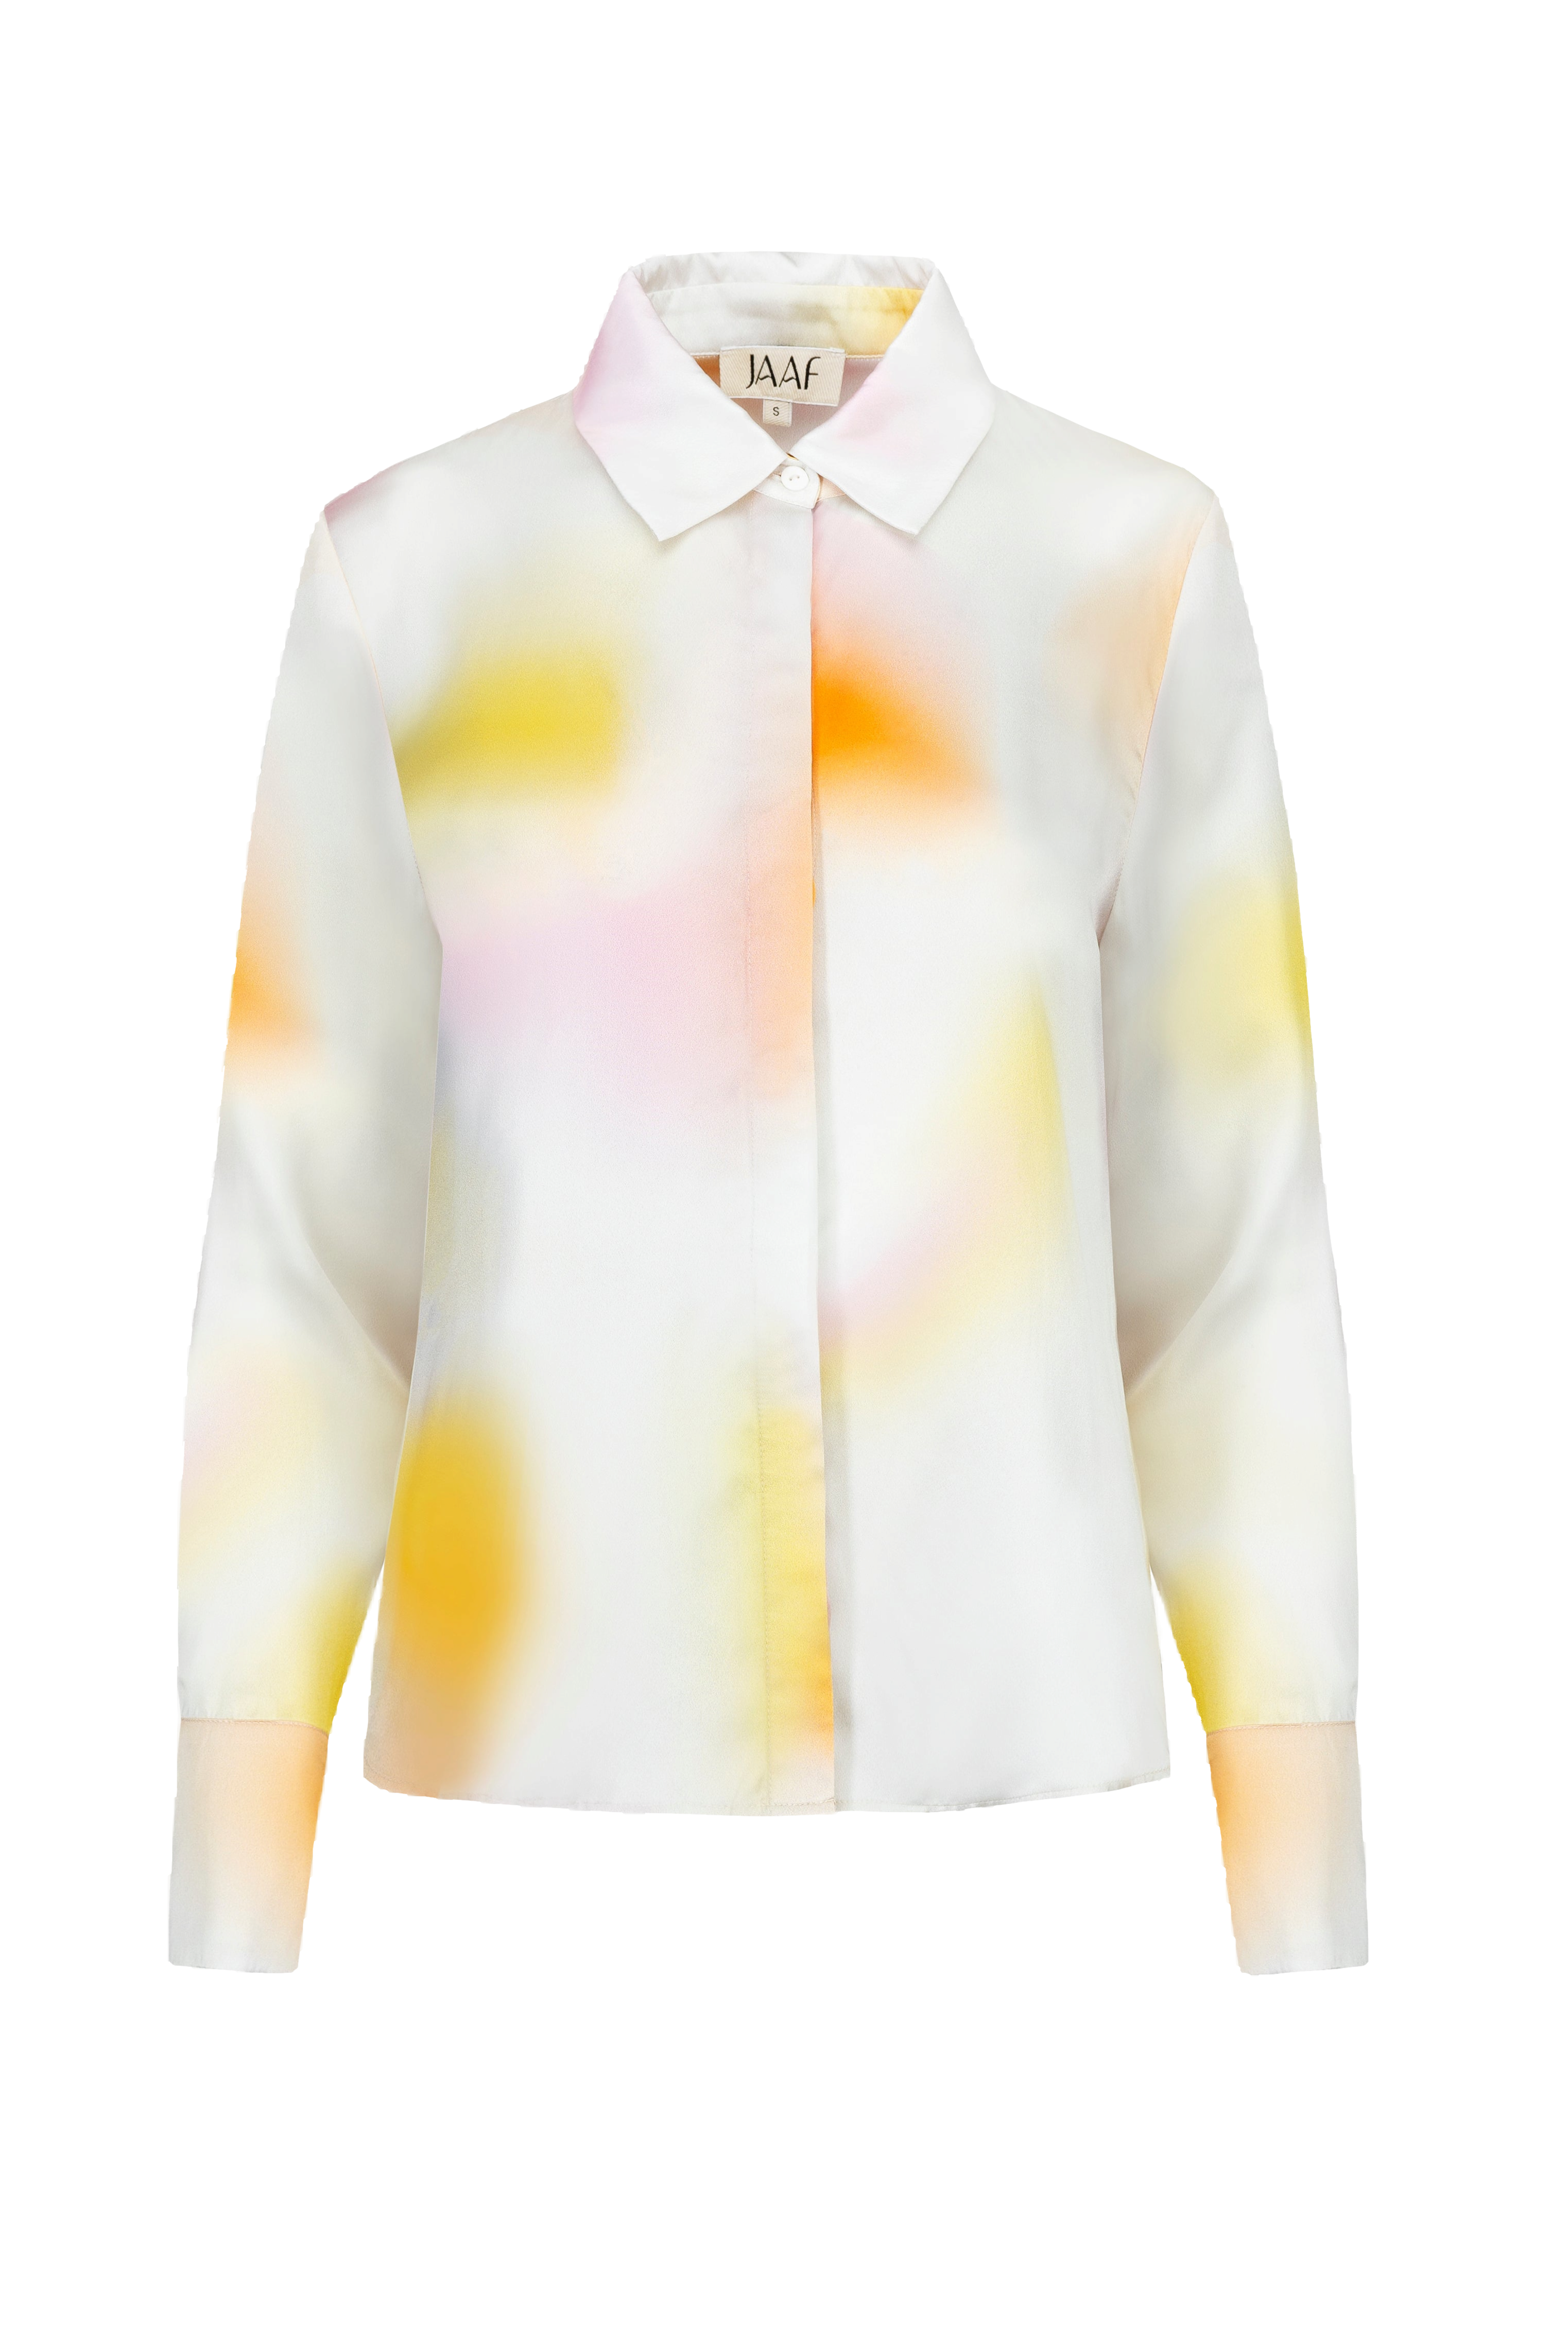 Jaaf Relaxed Shirt In Aura Light Print In Multi Color